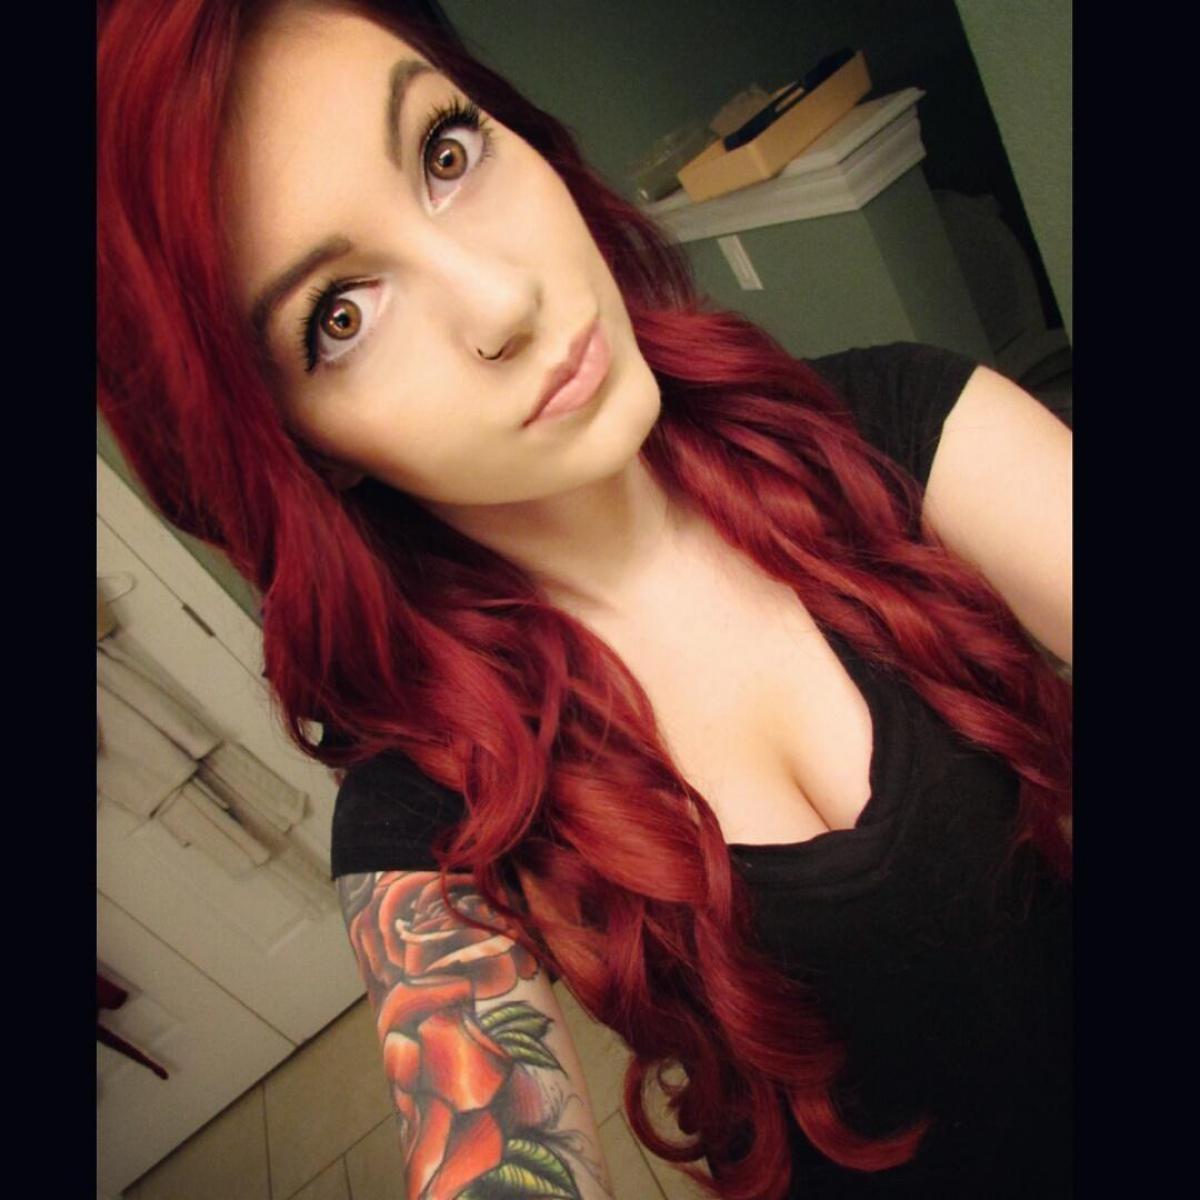 She is a redhead, something not that common with Twitch streamers, as well ...